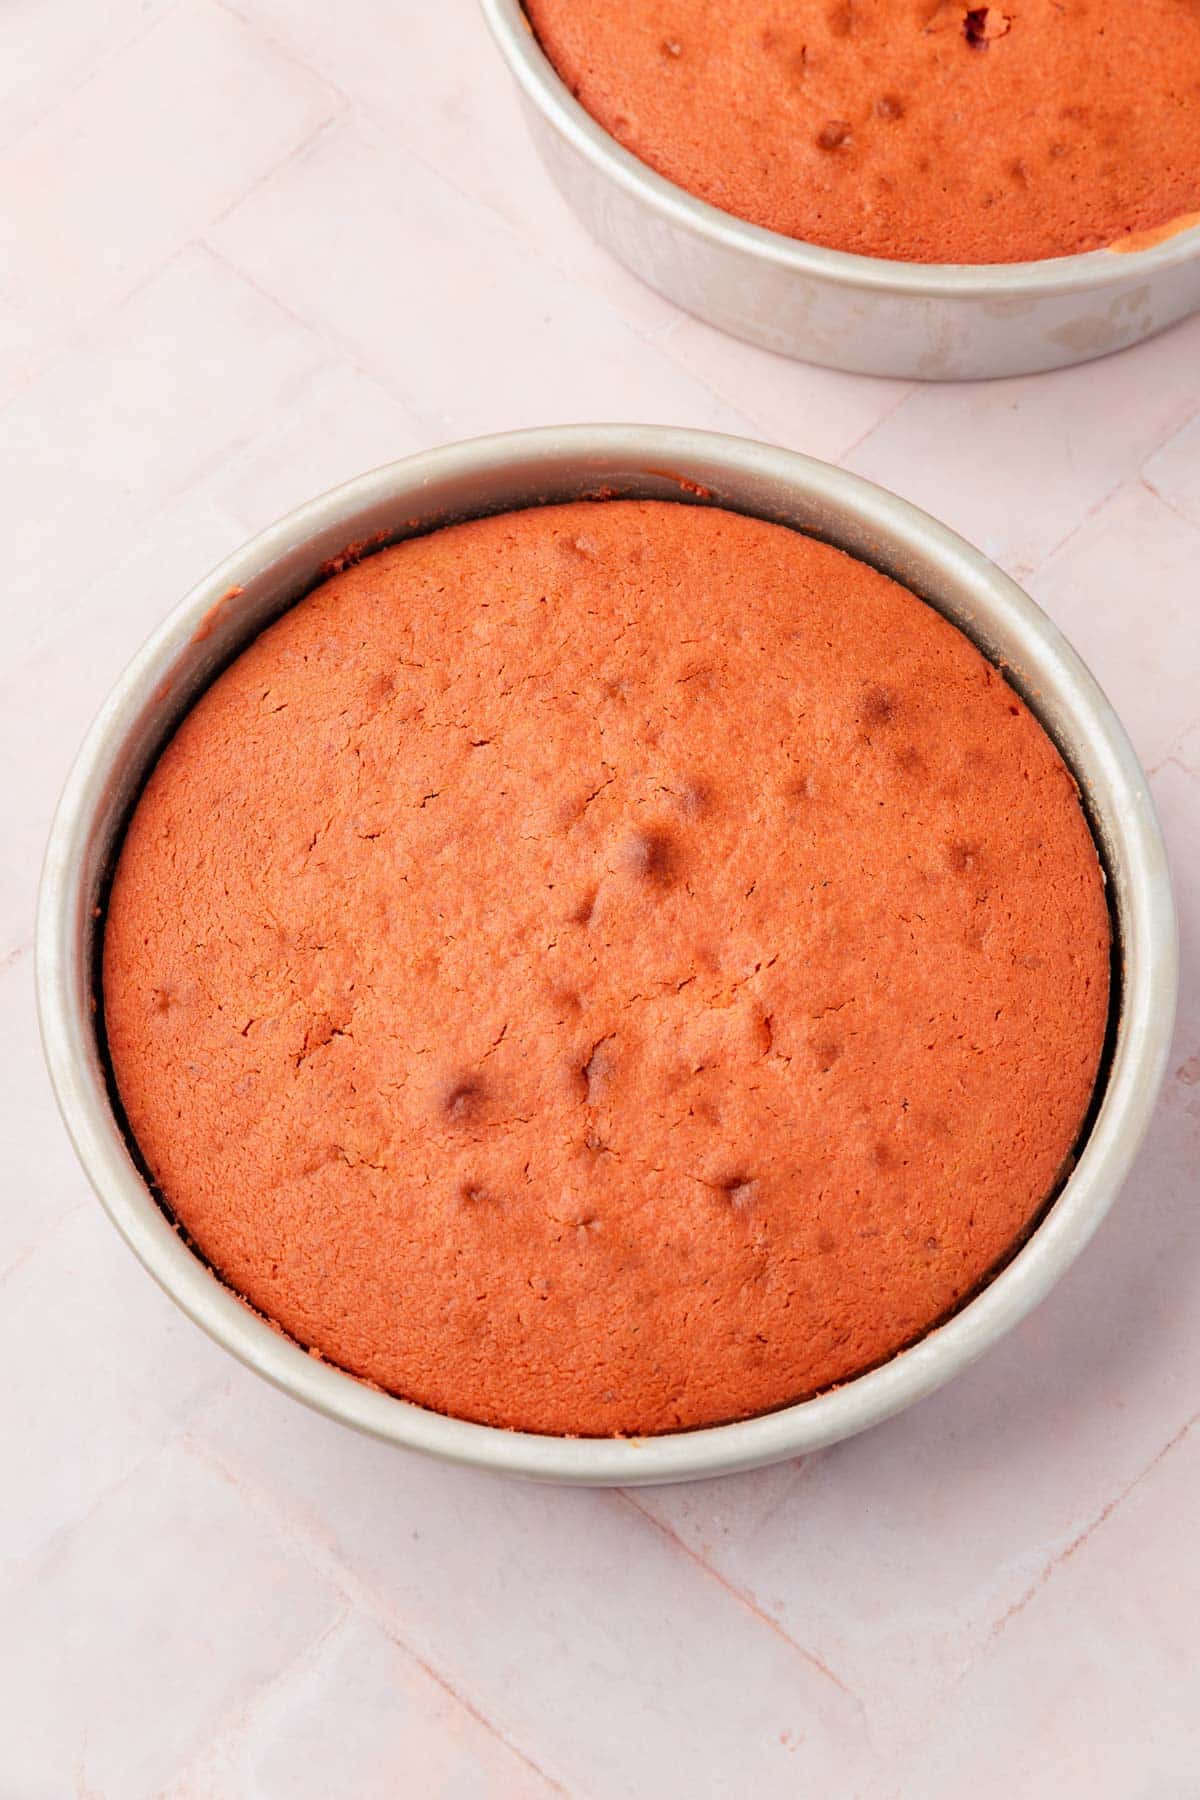 Baked strawberry cake in a round cake pan.